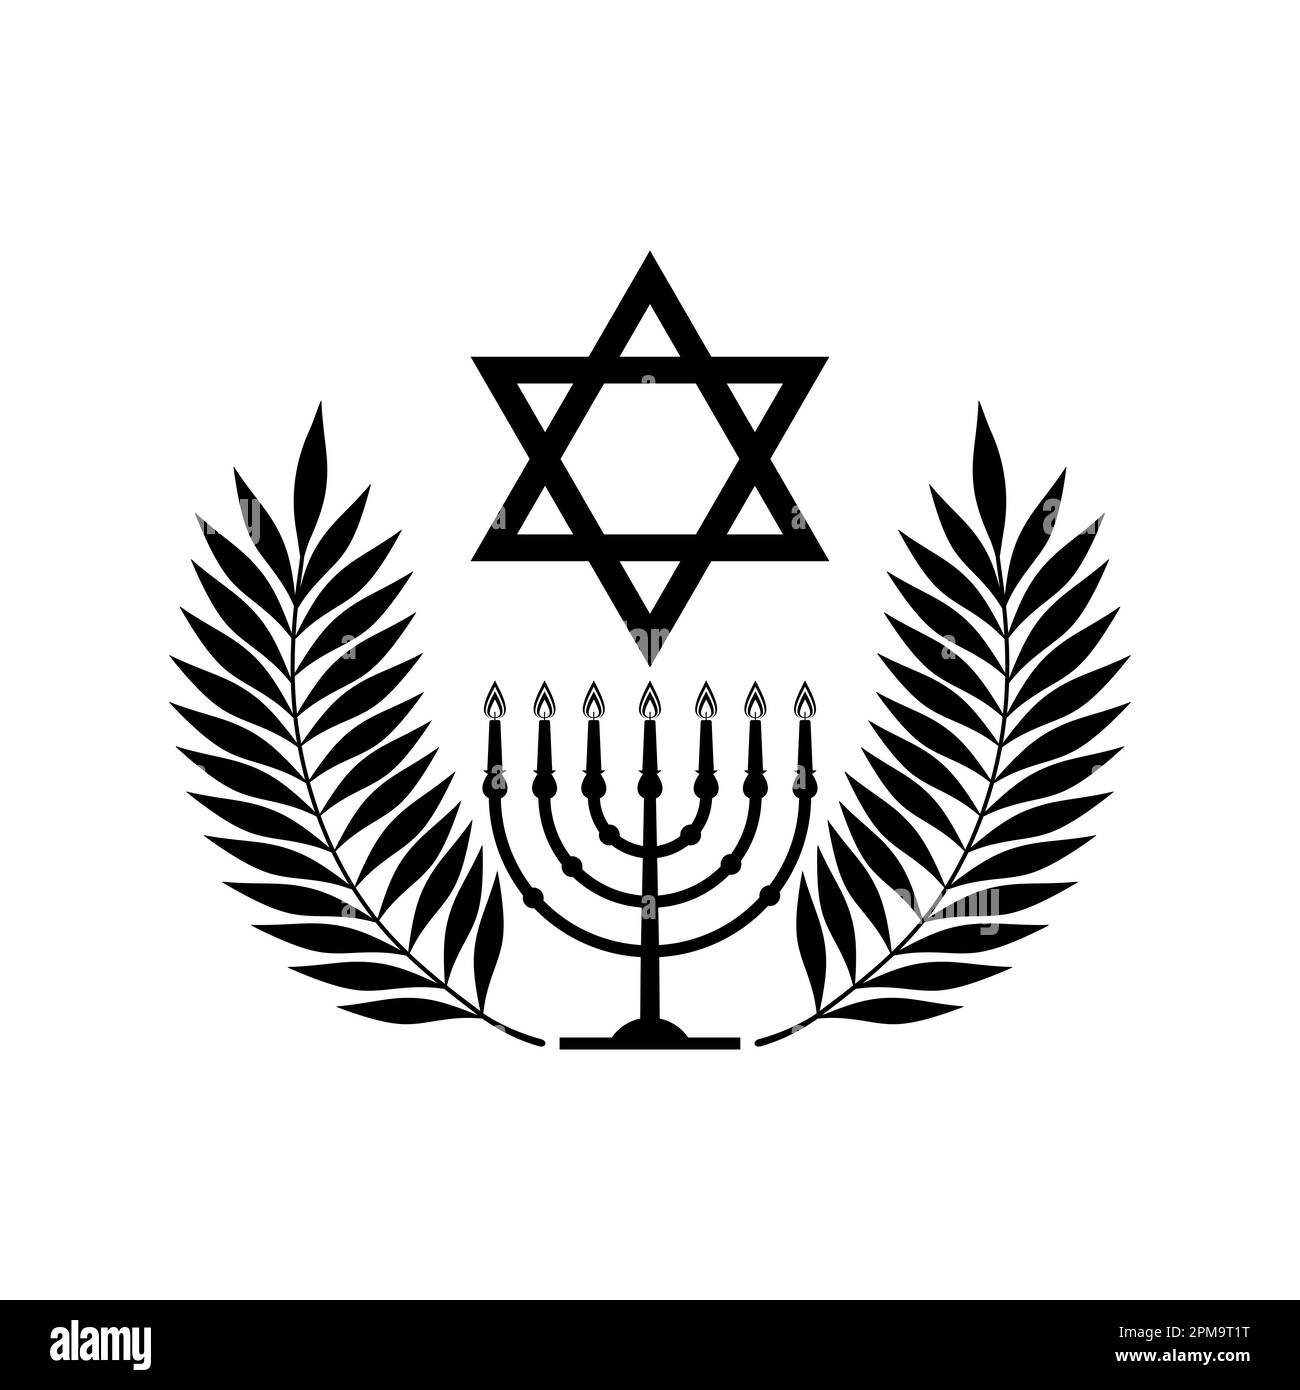 Vector illustration of the Jewish Star of David symbol combined with decorative design elements. Stock Vector